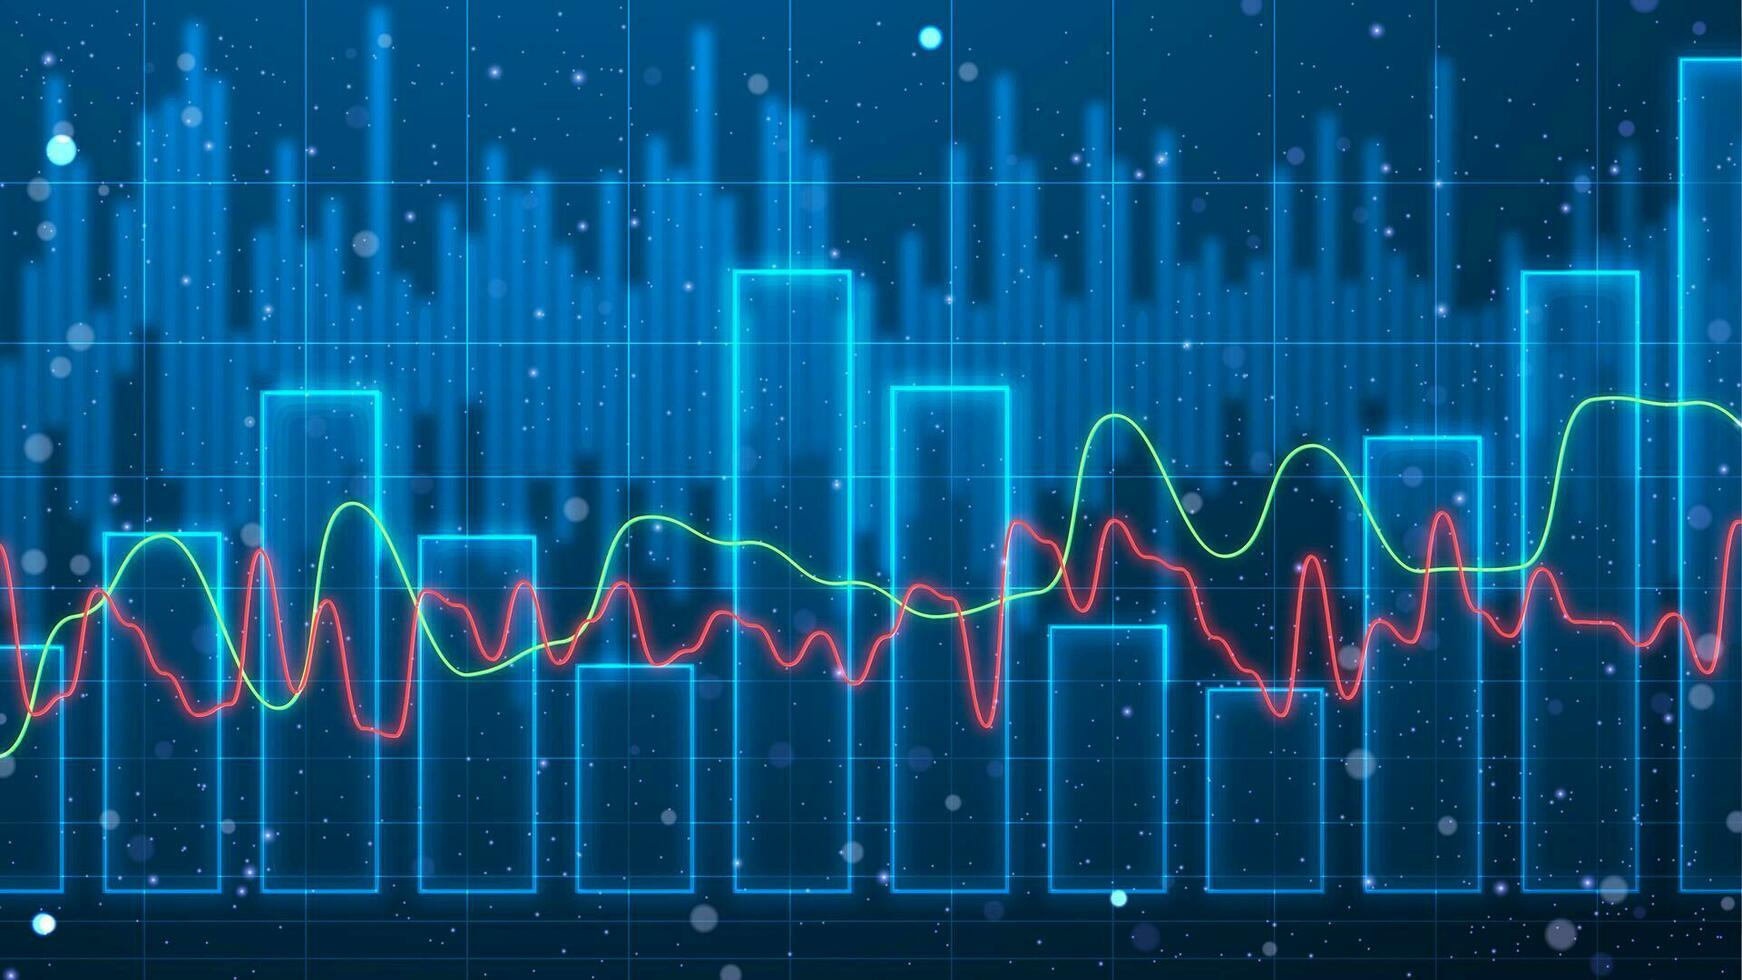 Futuristic bar chart wallpaper with red and green trend lines. Glowing financial static data illustration. Stock market digital display vector